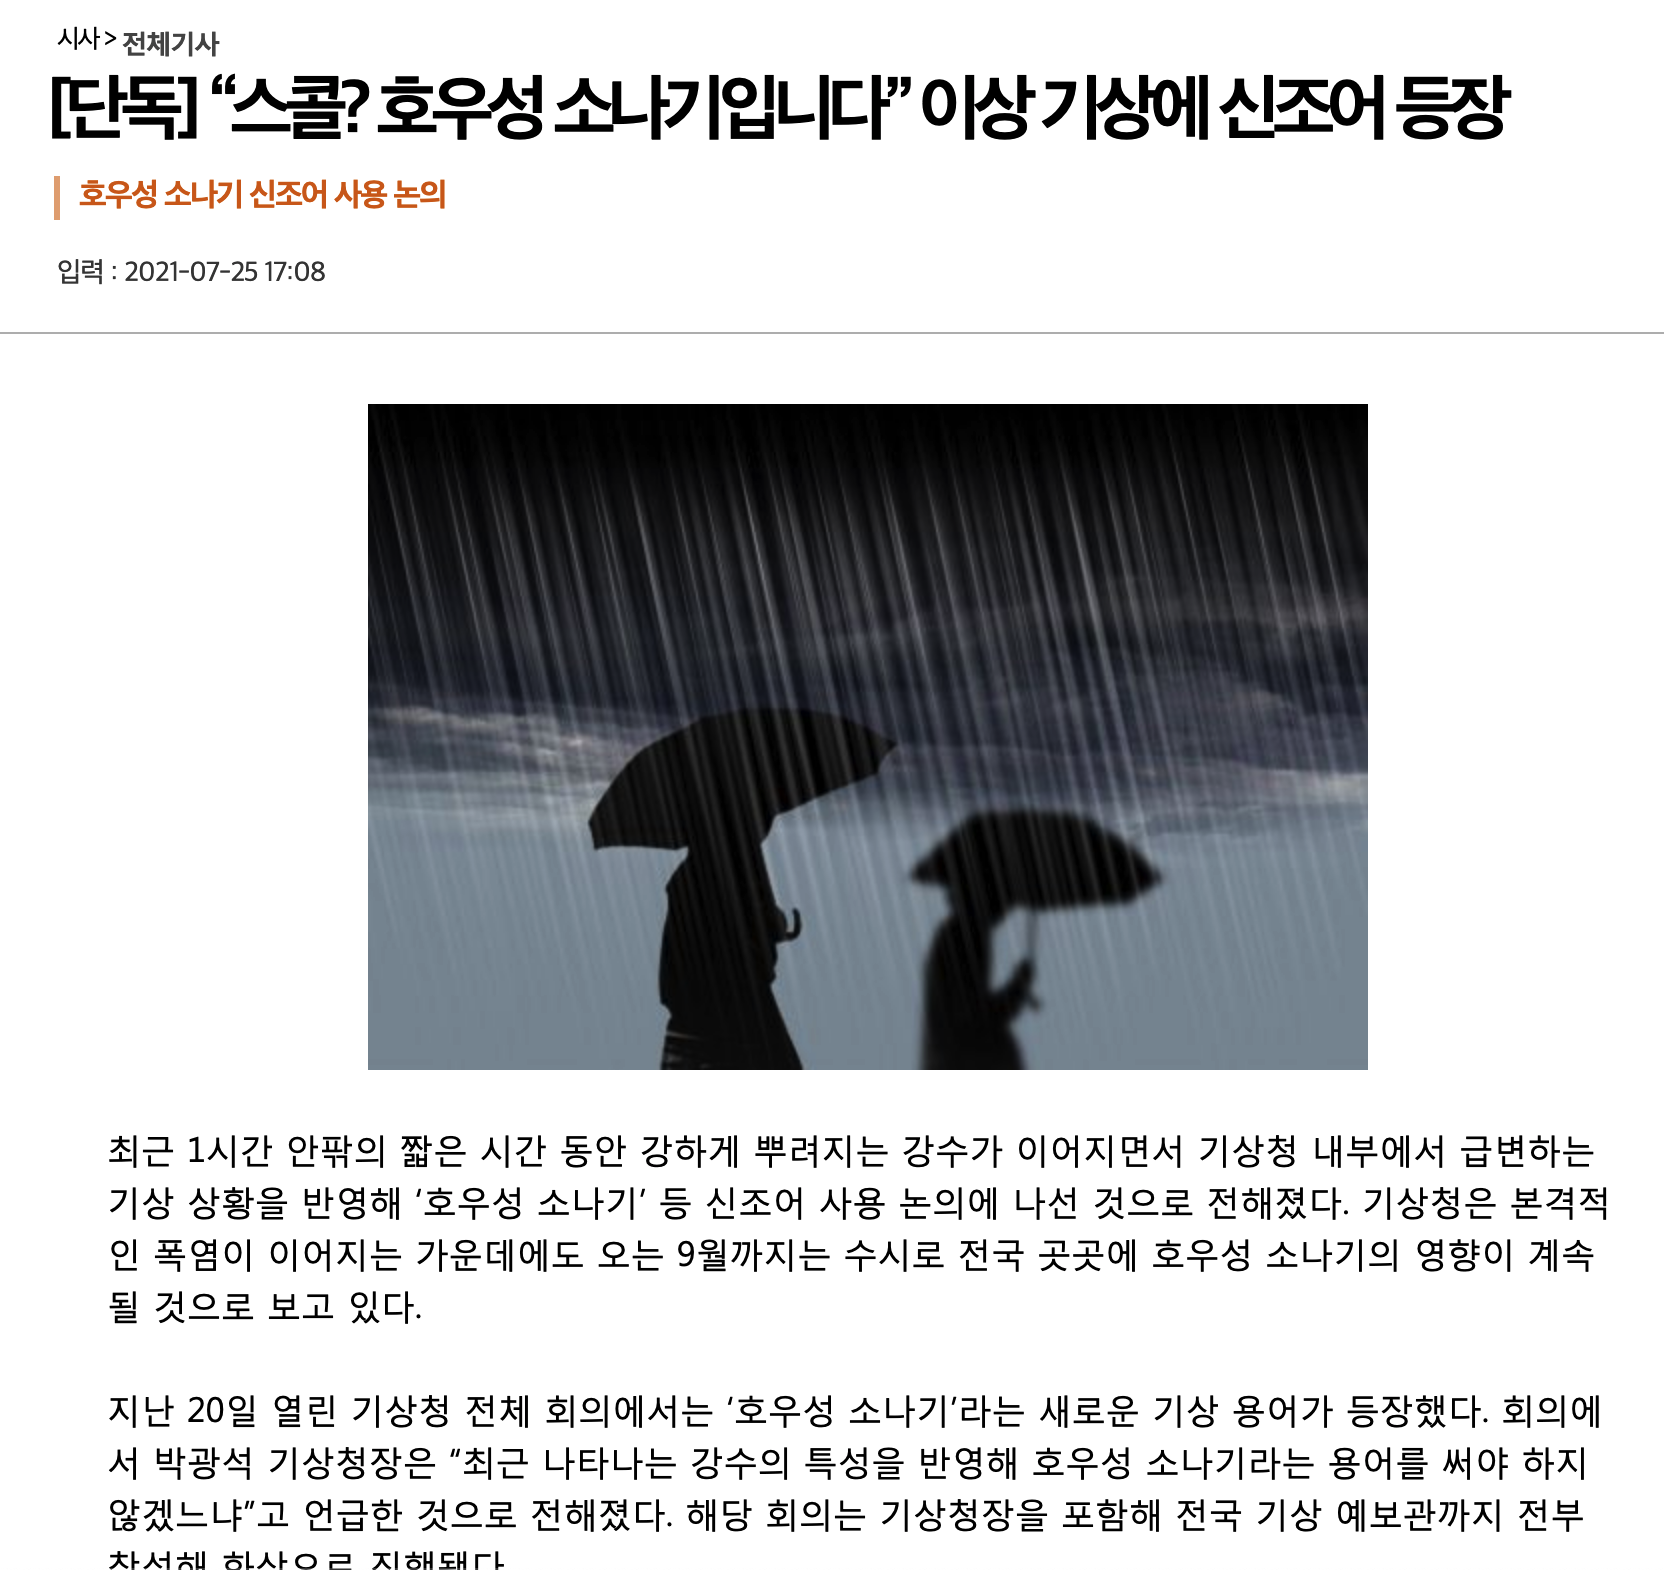 http://news.kmib.co.kr/article/view.asp?arcid=0016092372&code=61121111&stg=ws_real